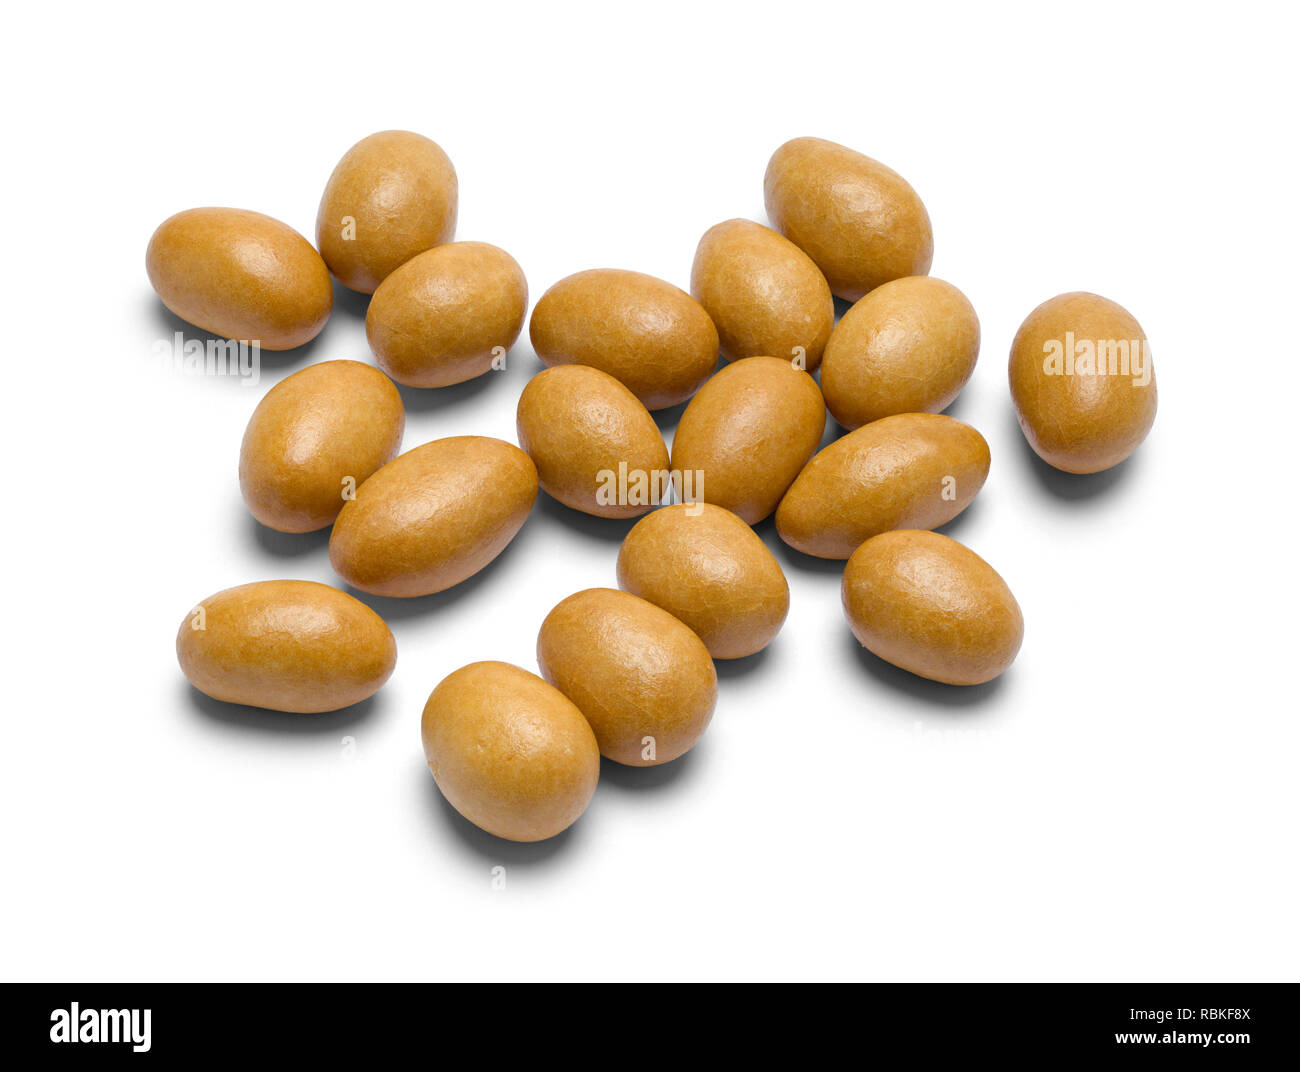 Group of Covered Peanuts Snack Isolated on a White Background. Stock Photo